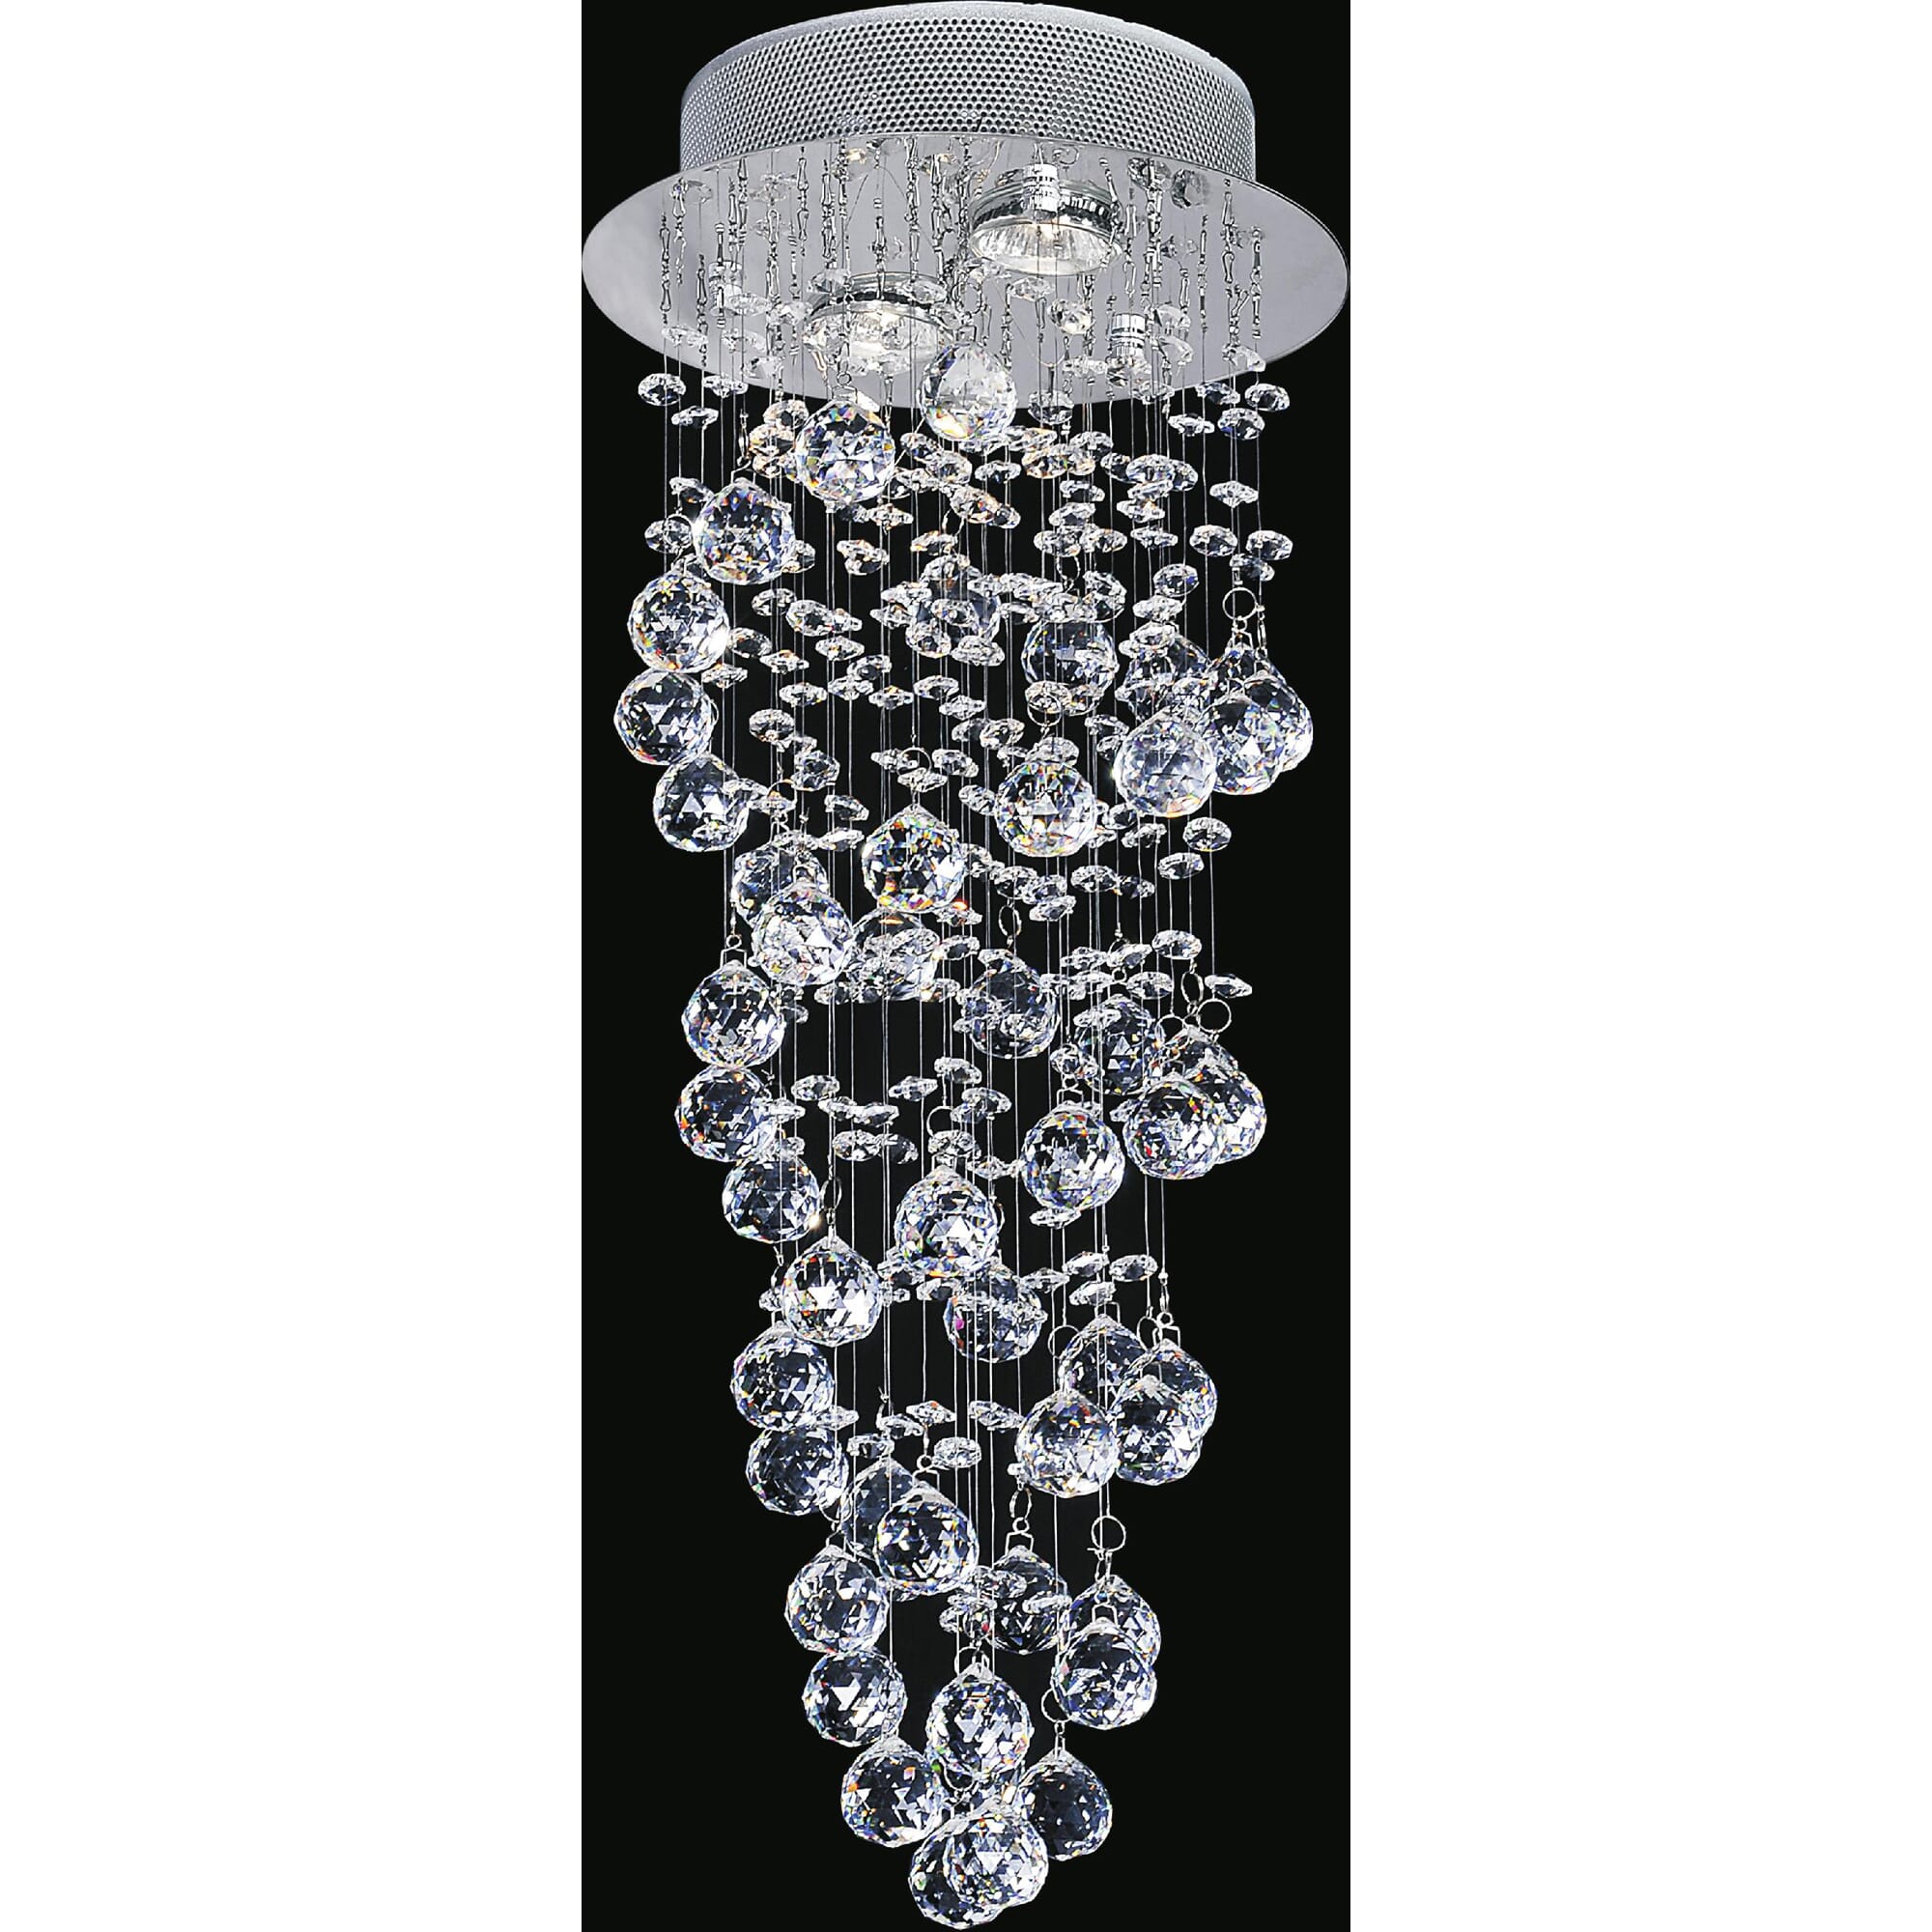 Double Spiral 2 Light Flush Mount with Chrome finish